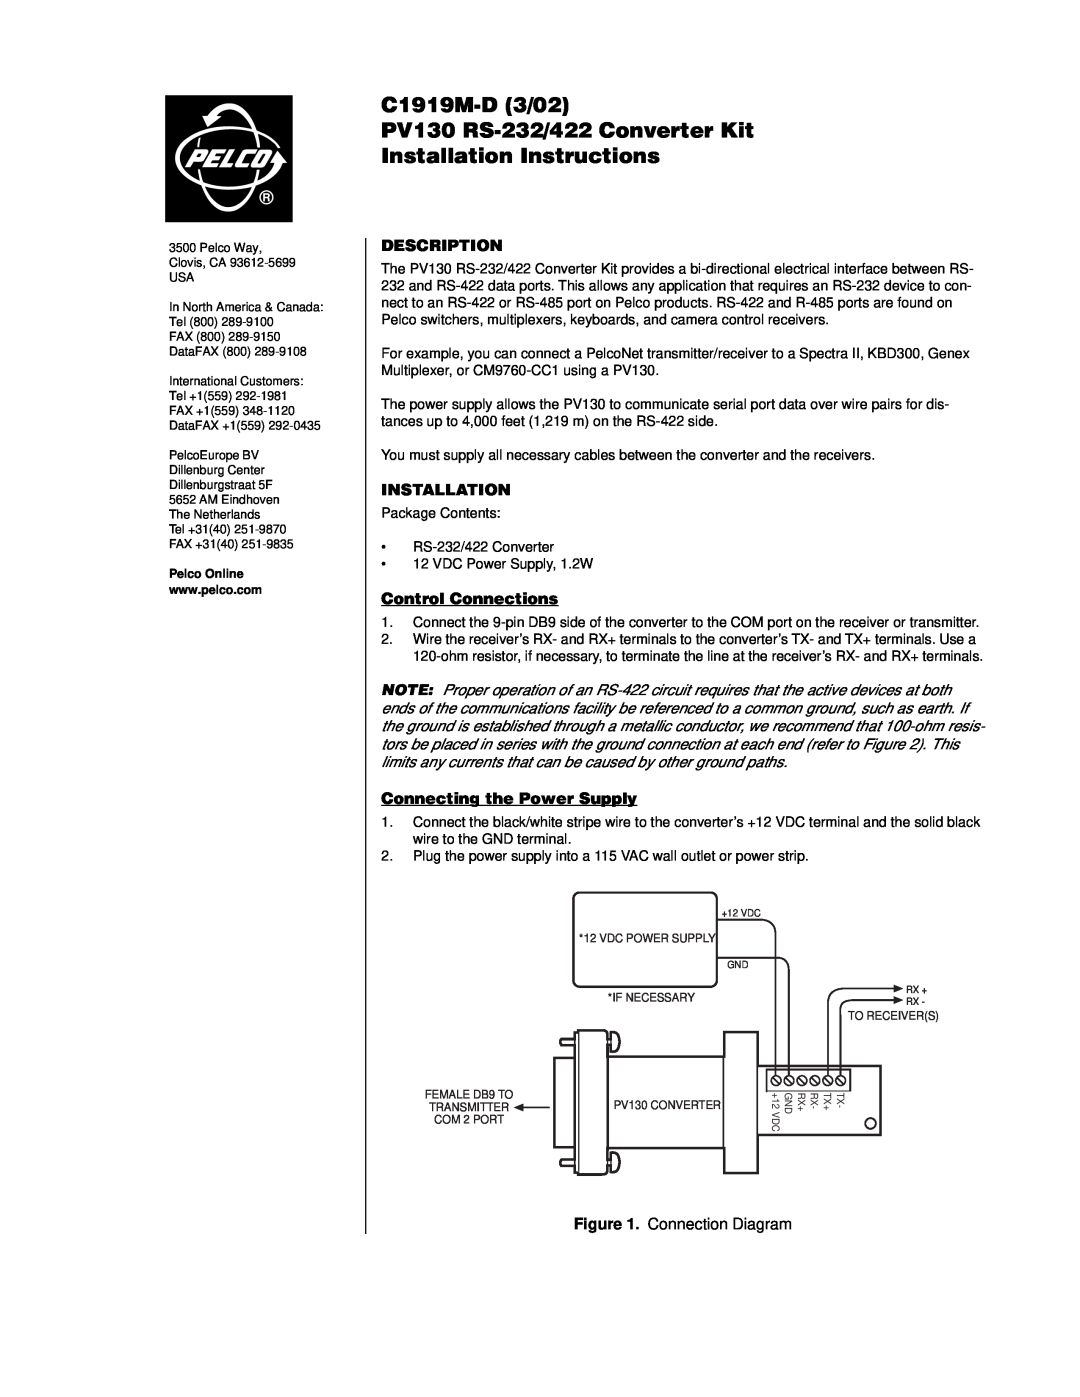 Pelco PV130 RS-422 installation instructions Description, Installation, Control Connections, Connecting the Power Supply 